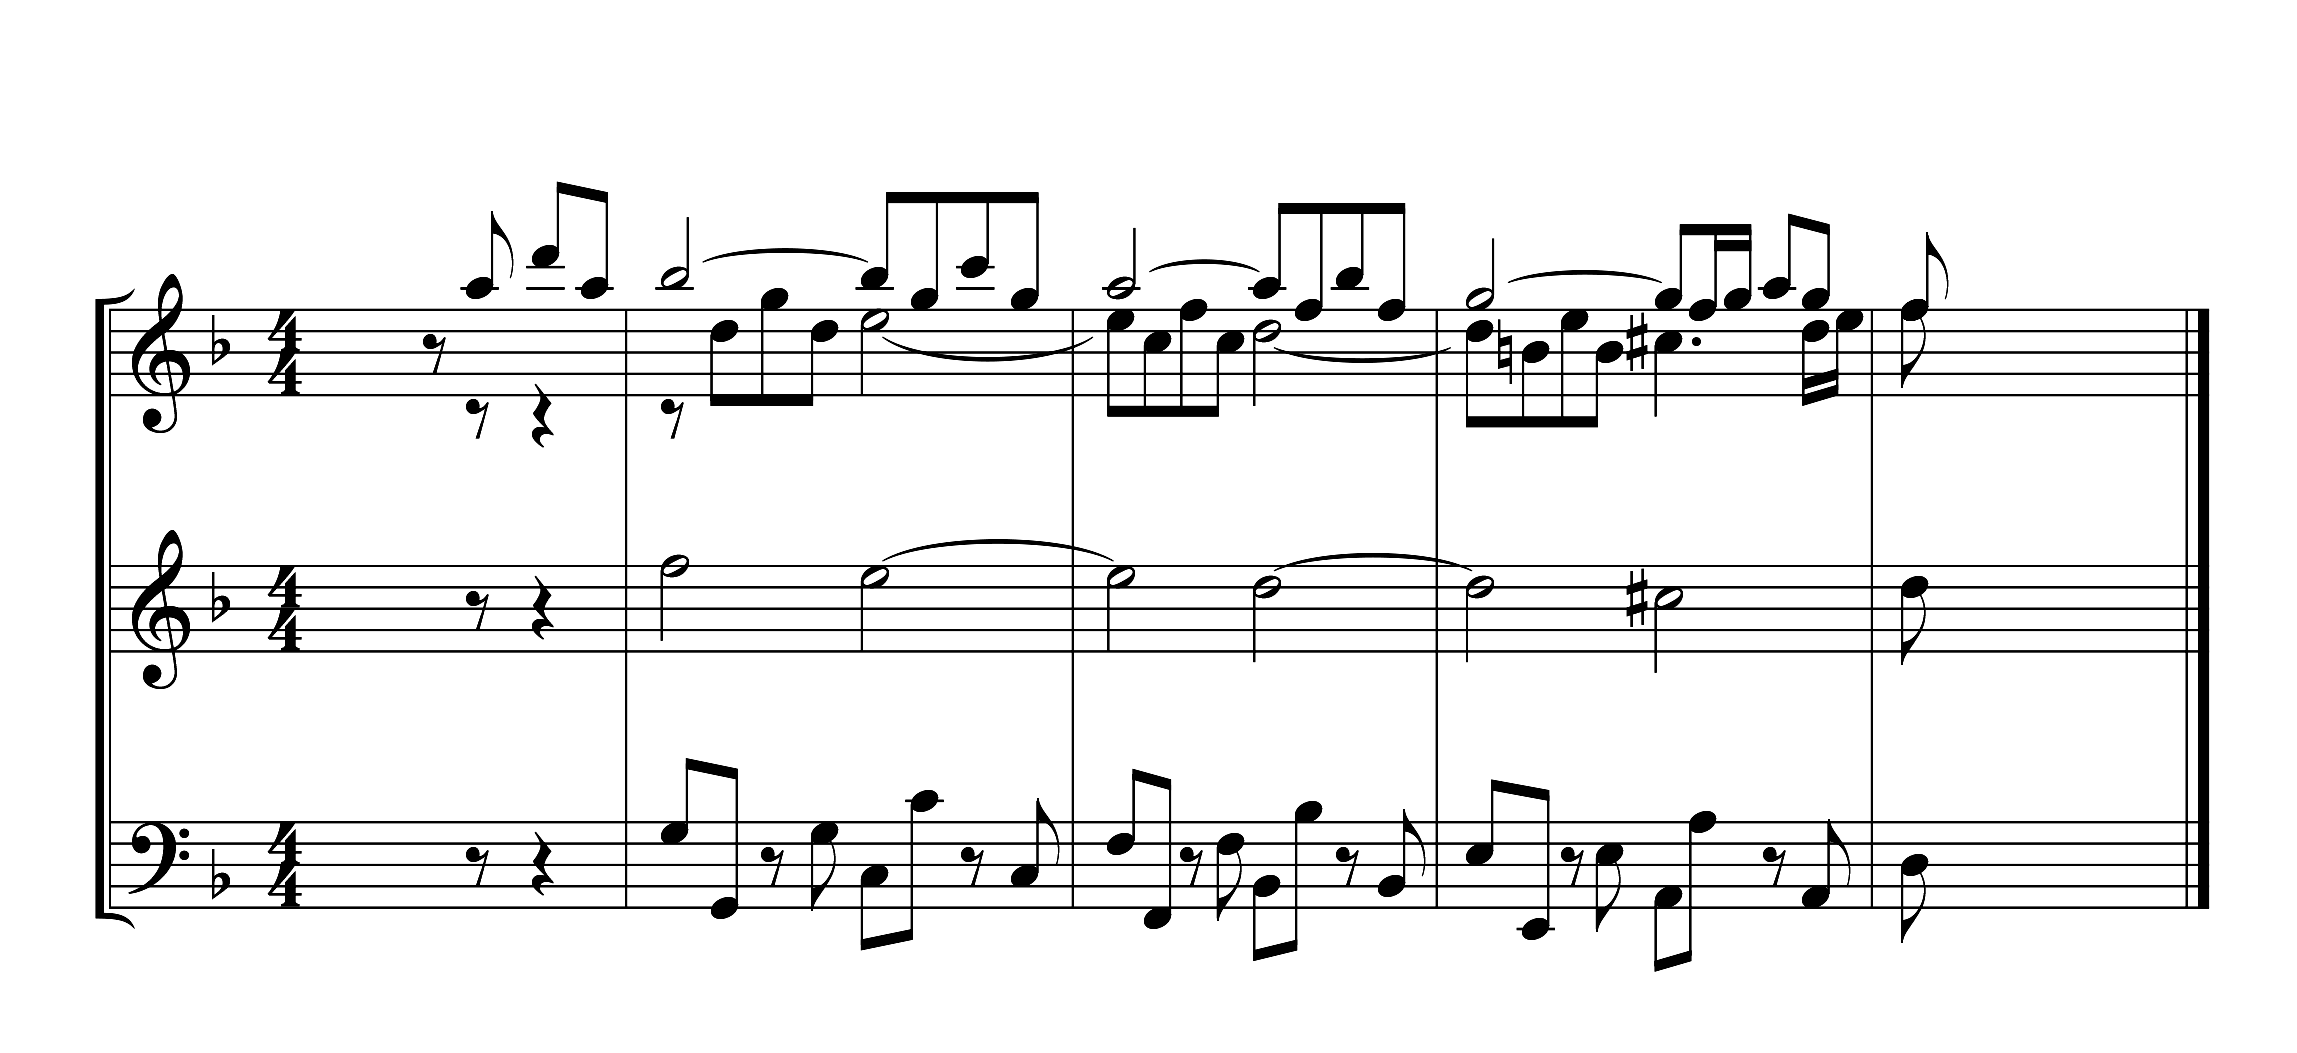 An excerpt from J.S. Bach's Brandenburg Concerto Number 2, movement 1